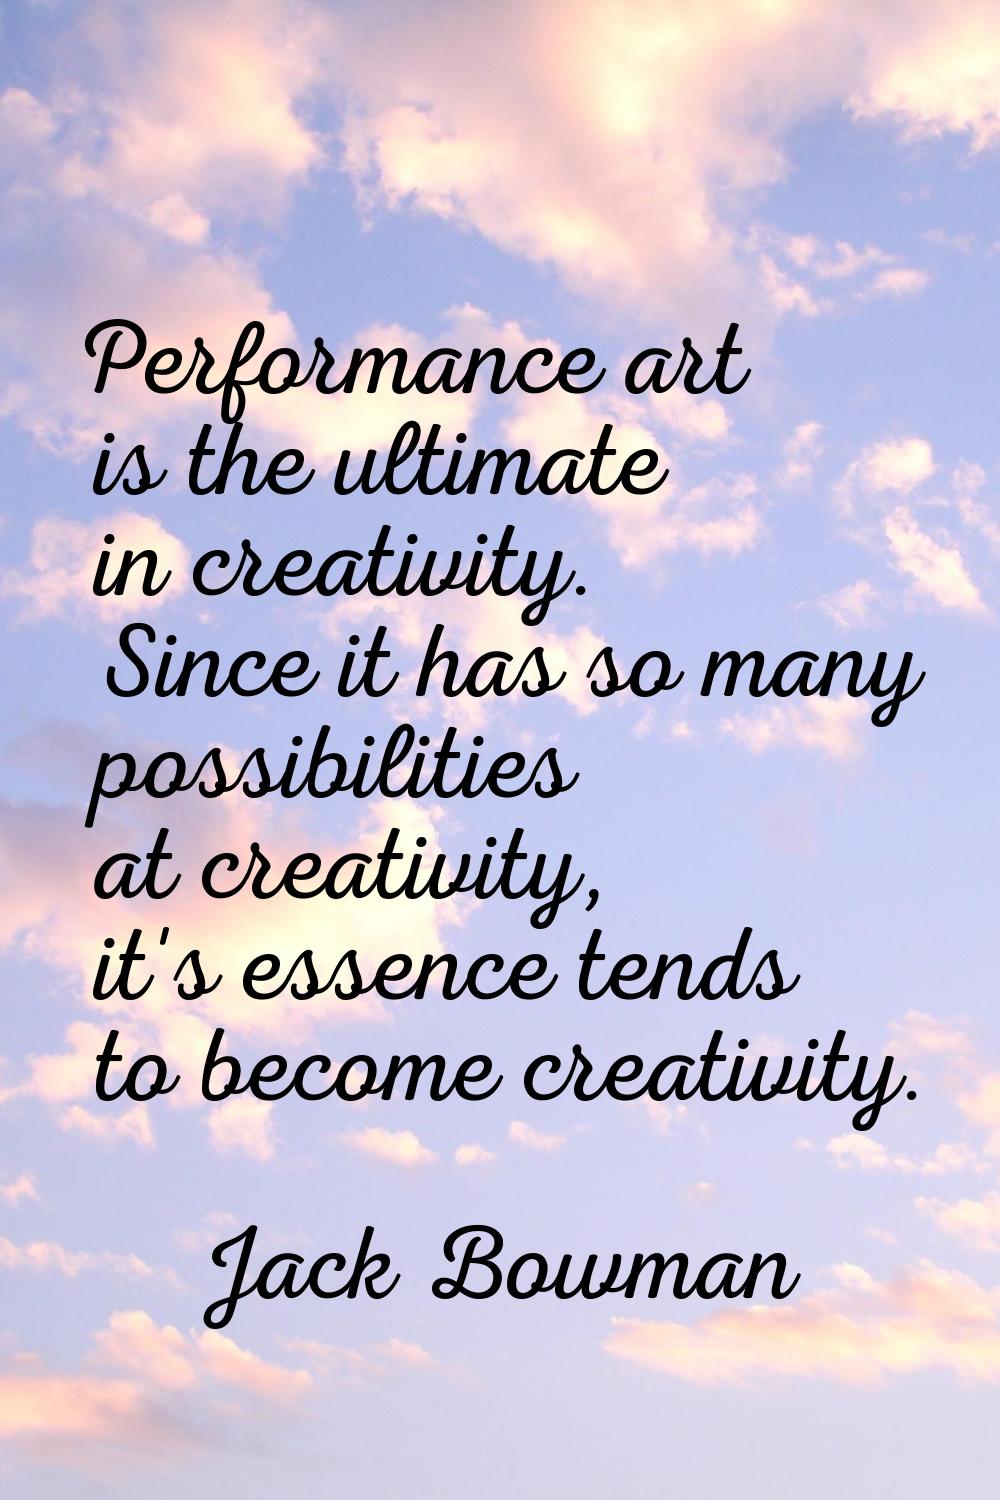 Performance art is the ultimate in creativity. Since it has so many possibilities at creativity, it